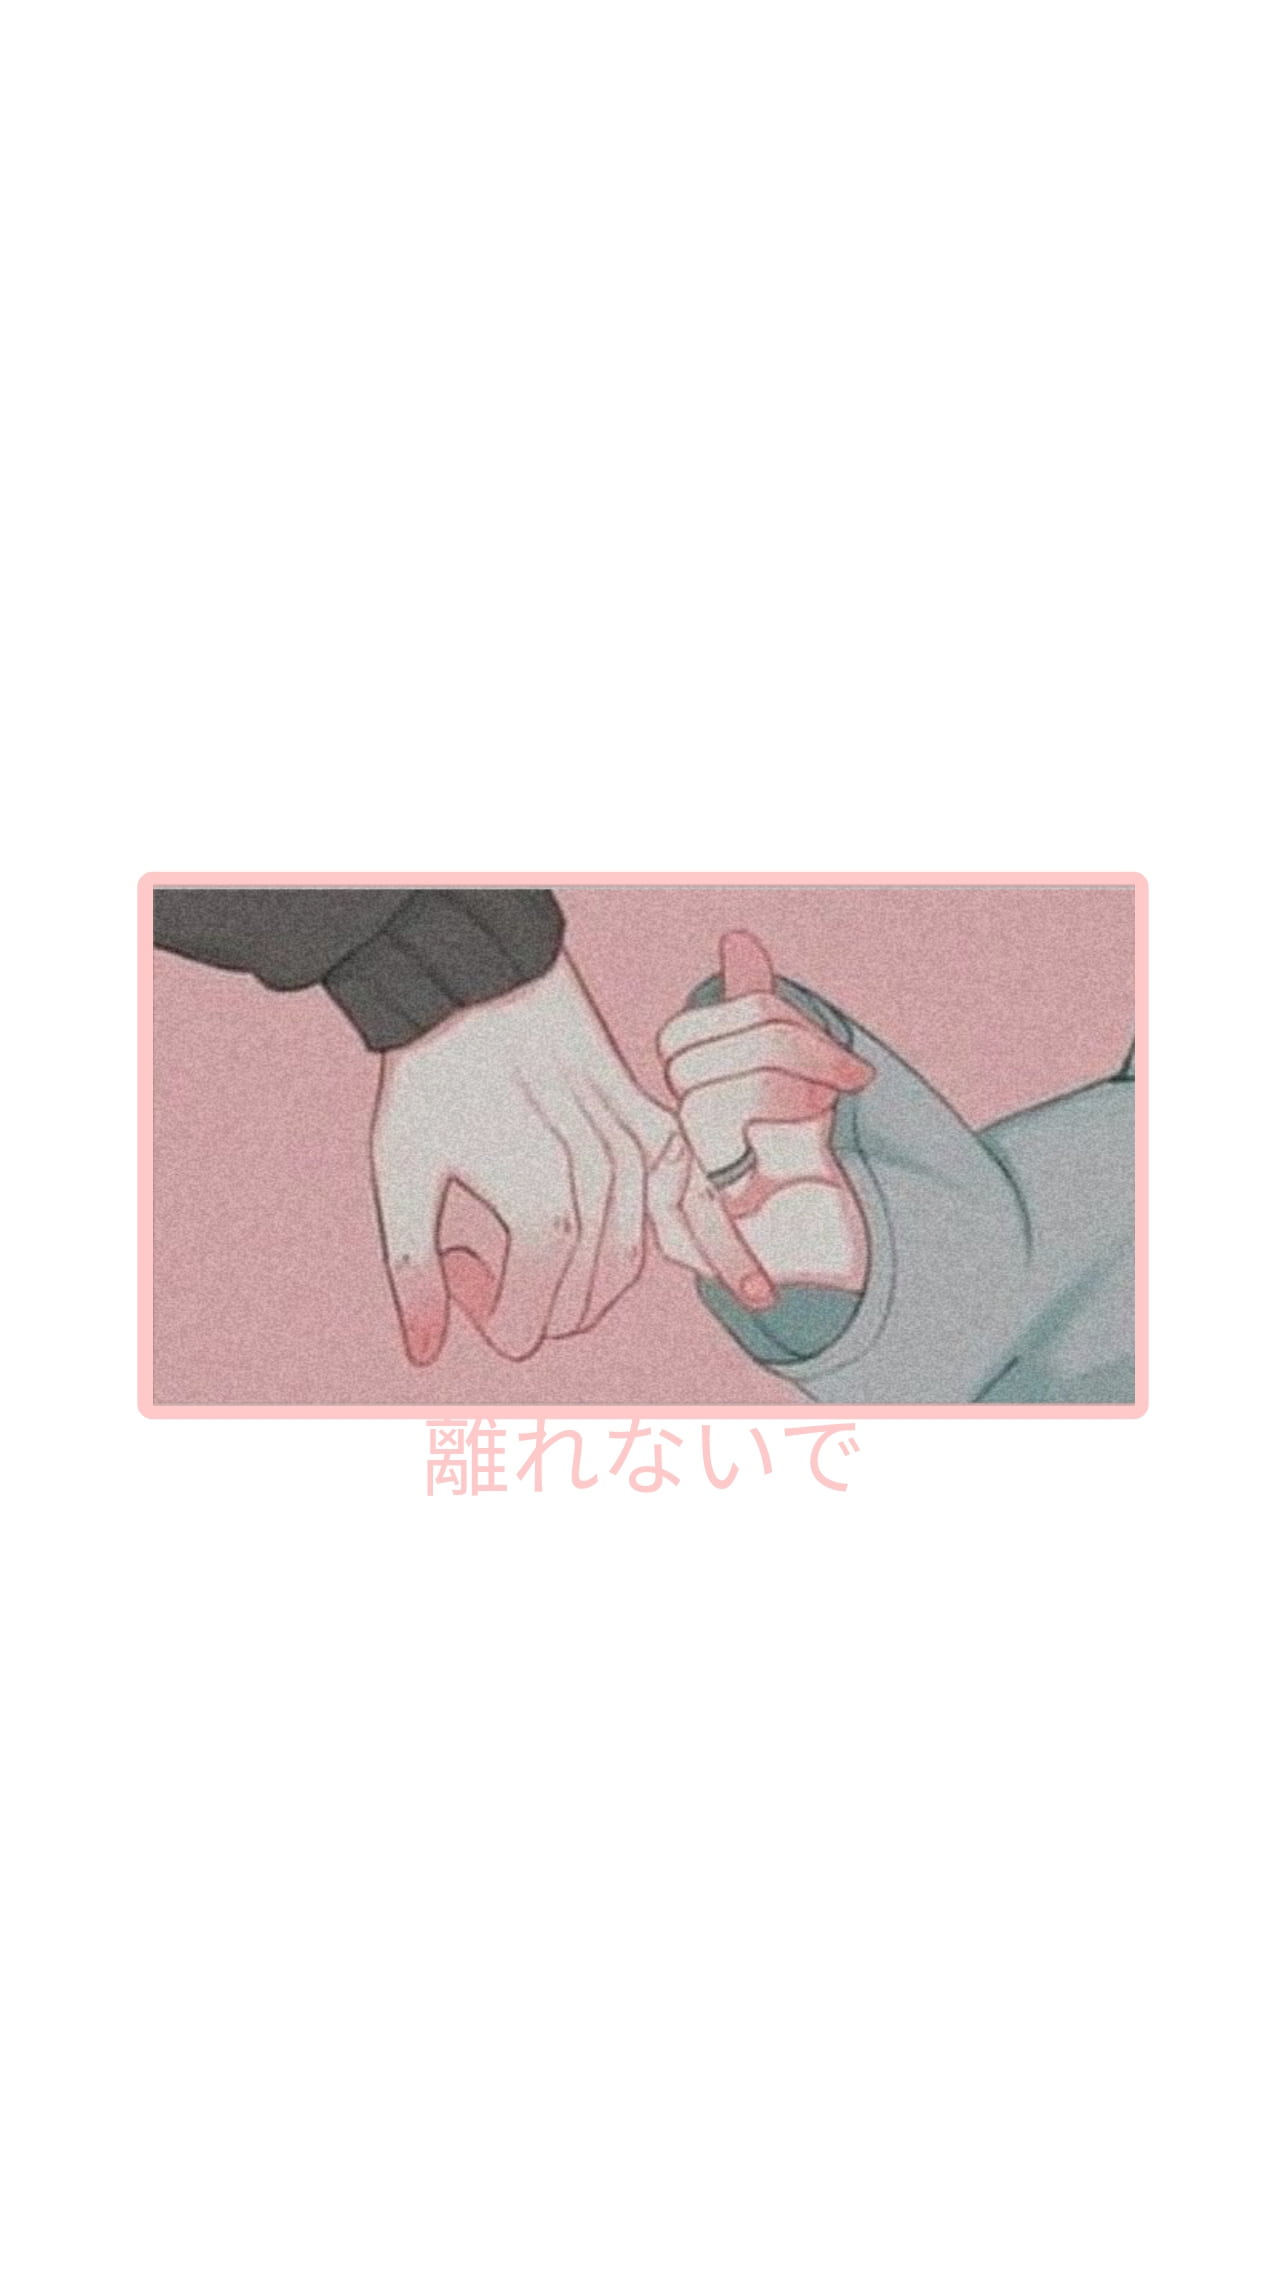 A hand holding another one in the middle of two people - 90s anime